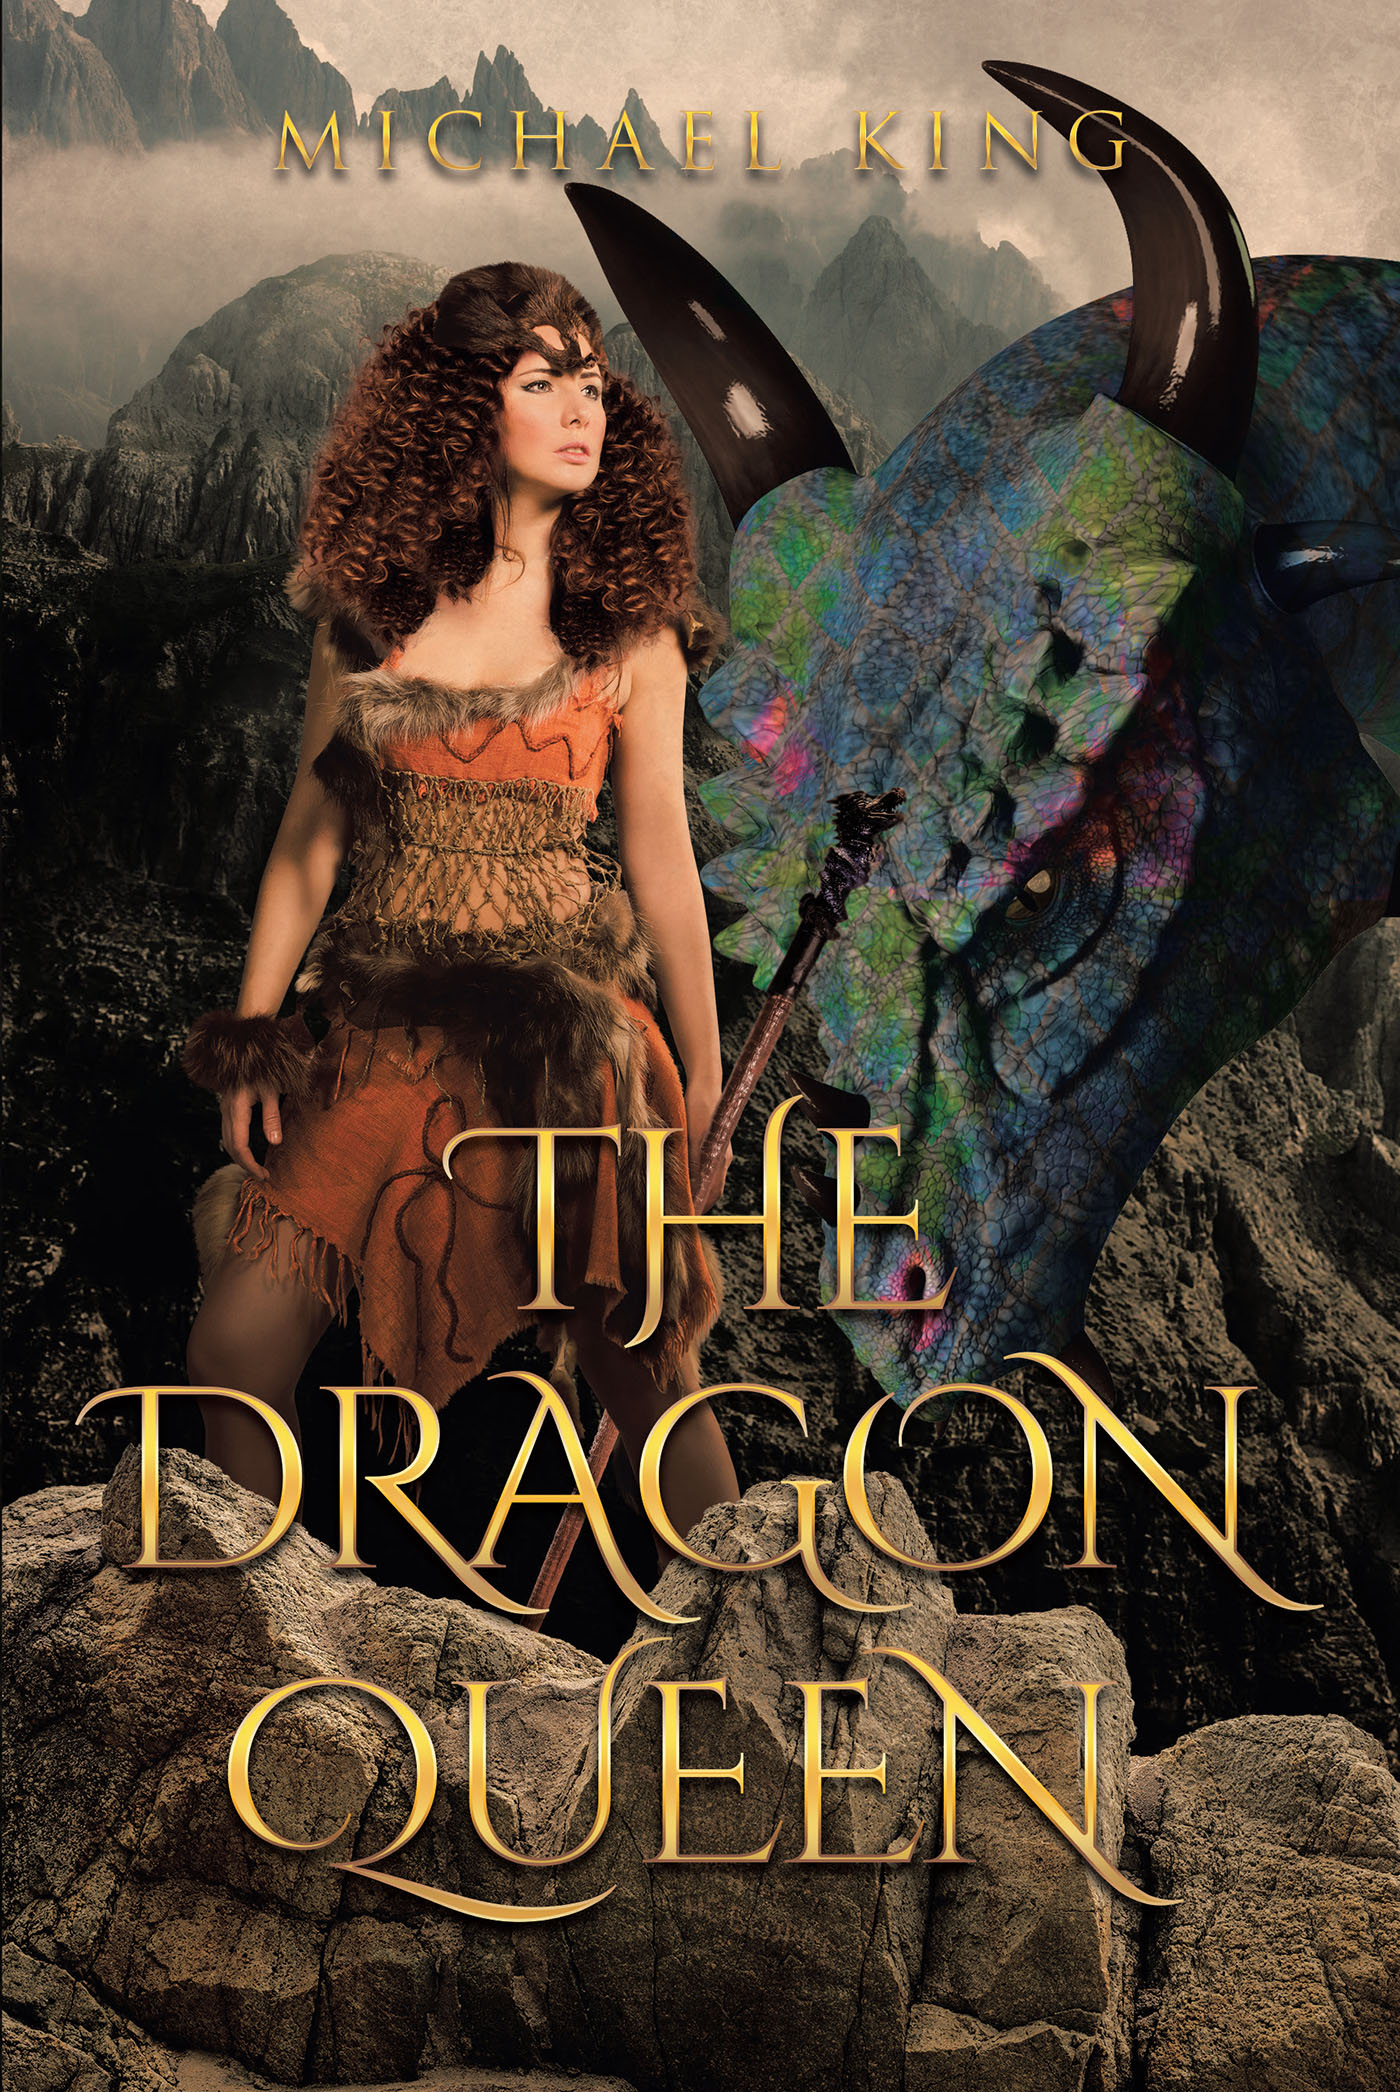 The Dragon Queen Cover Image